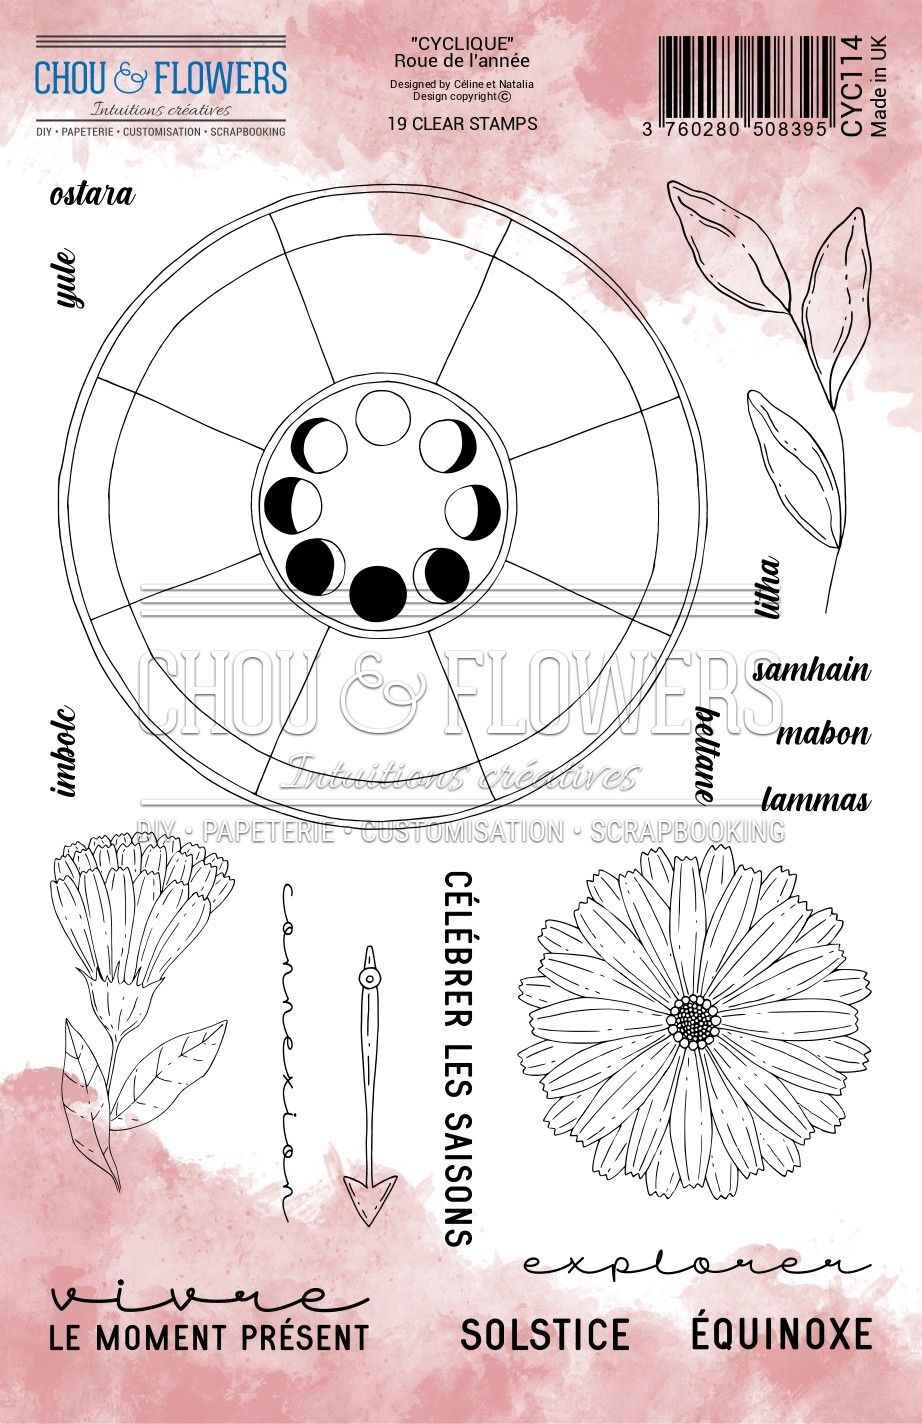 Chou & Flowers - Clear Stamps - A5 - Color Wheel of the Year - CYC114 (discontinued)